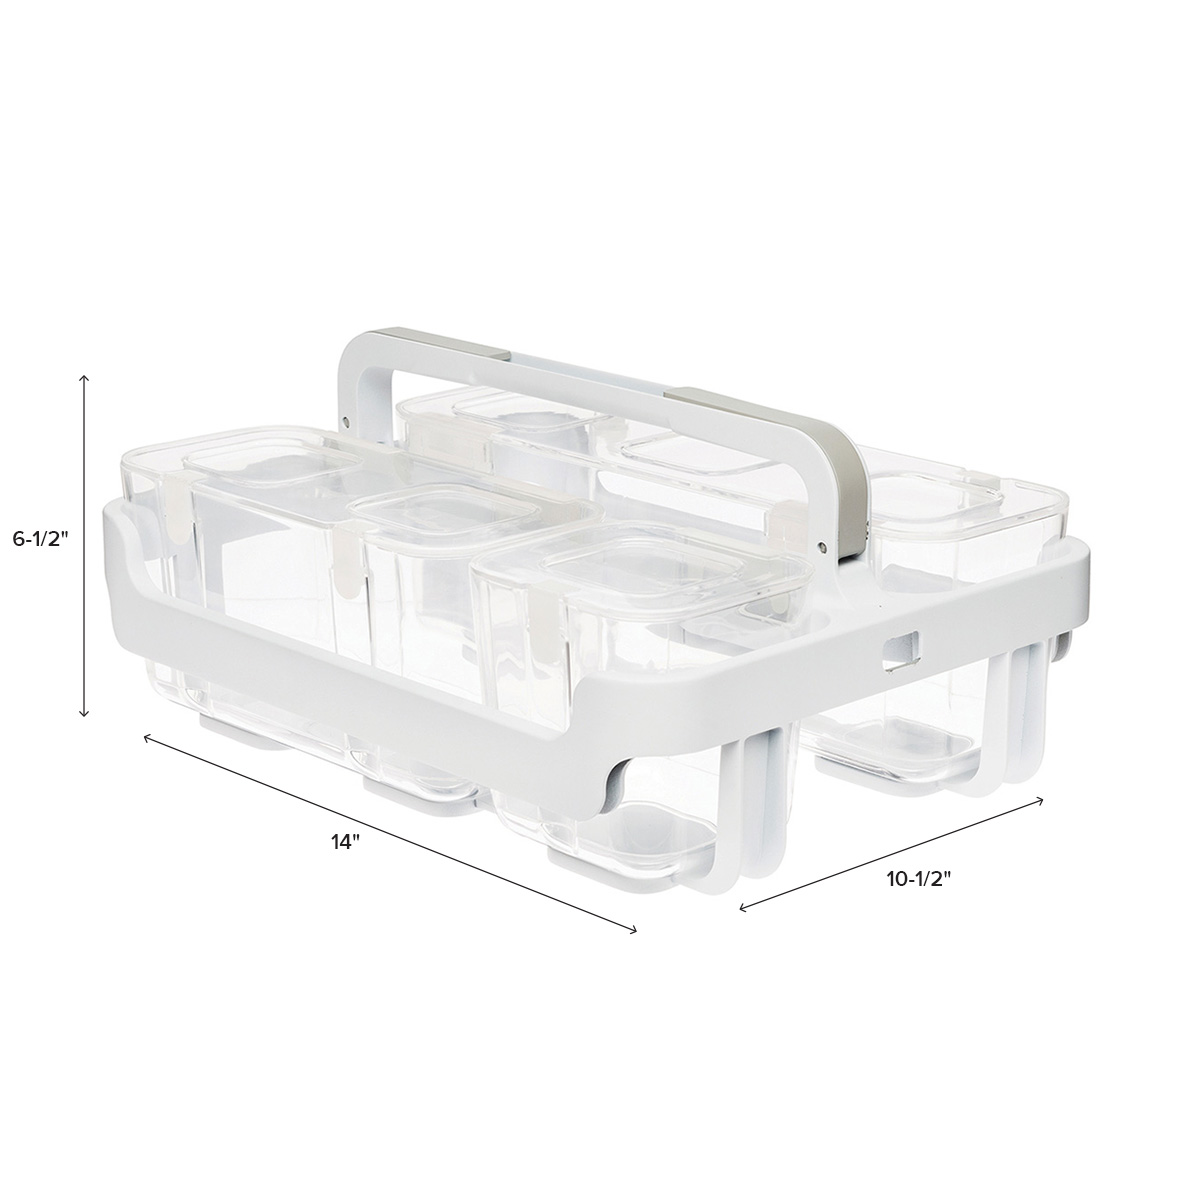 https://www.containerstore.com/catalogimages/445791/10080739-Deflecto-Caddy-Organizer-Fr.jpg